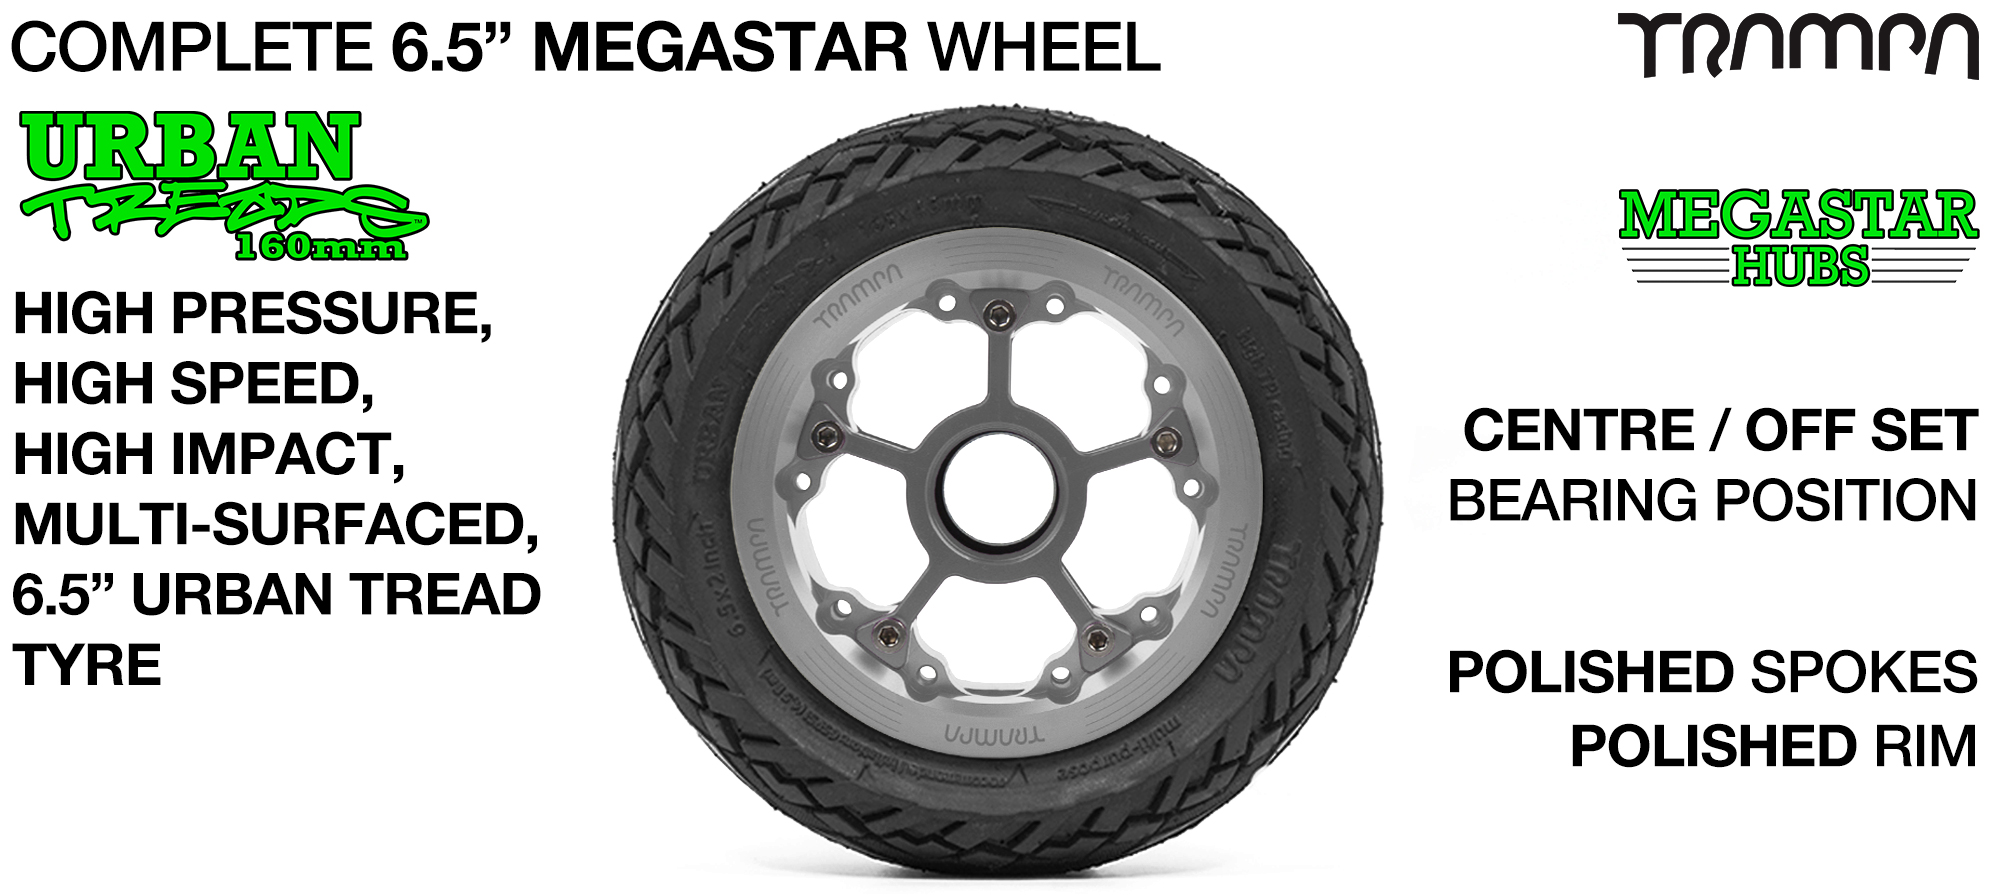 CENTER-SET MEGASTAR 8 Hub with POLISHED Rims & POLISHED Spokes with the amazing Low Profile 6.5 Inch URBAN Treads Tyres